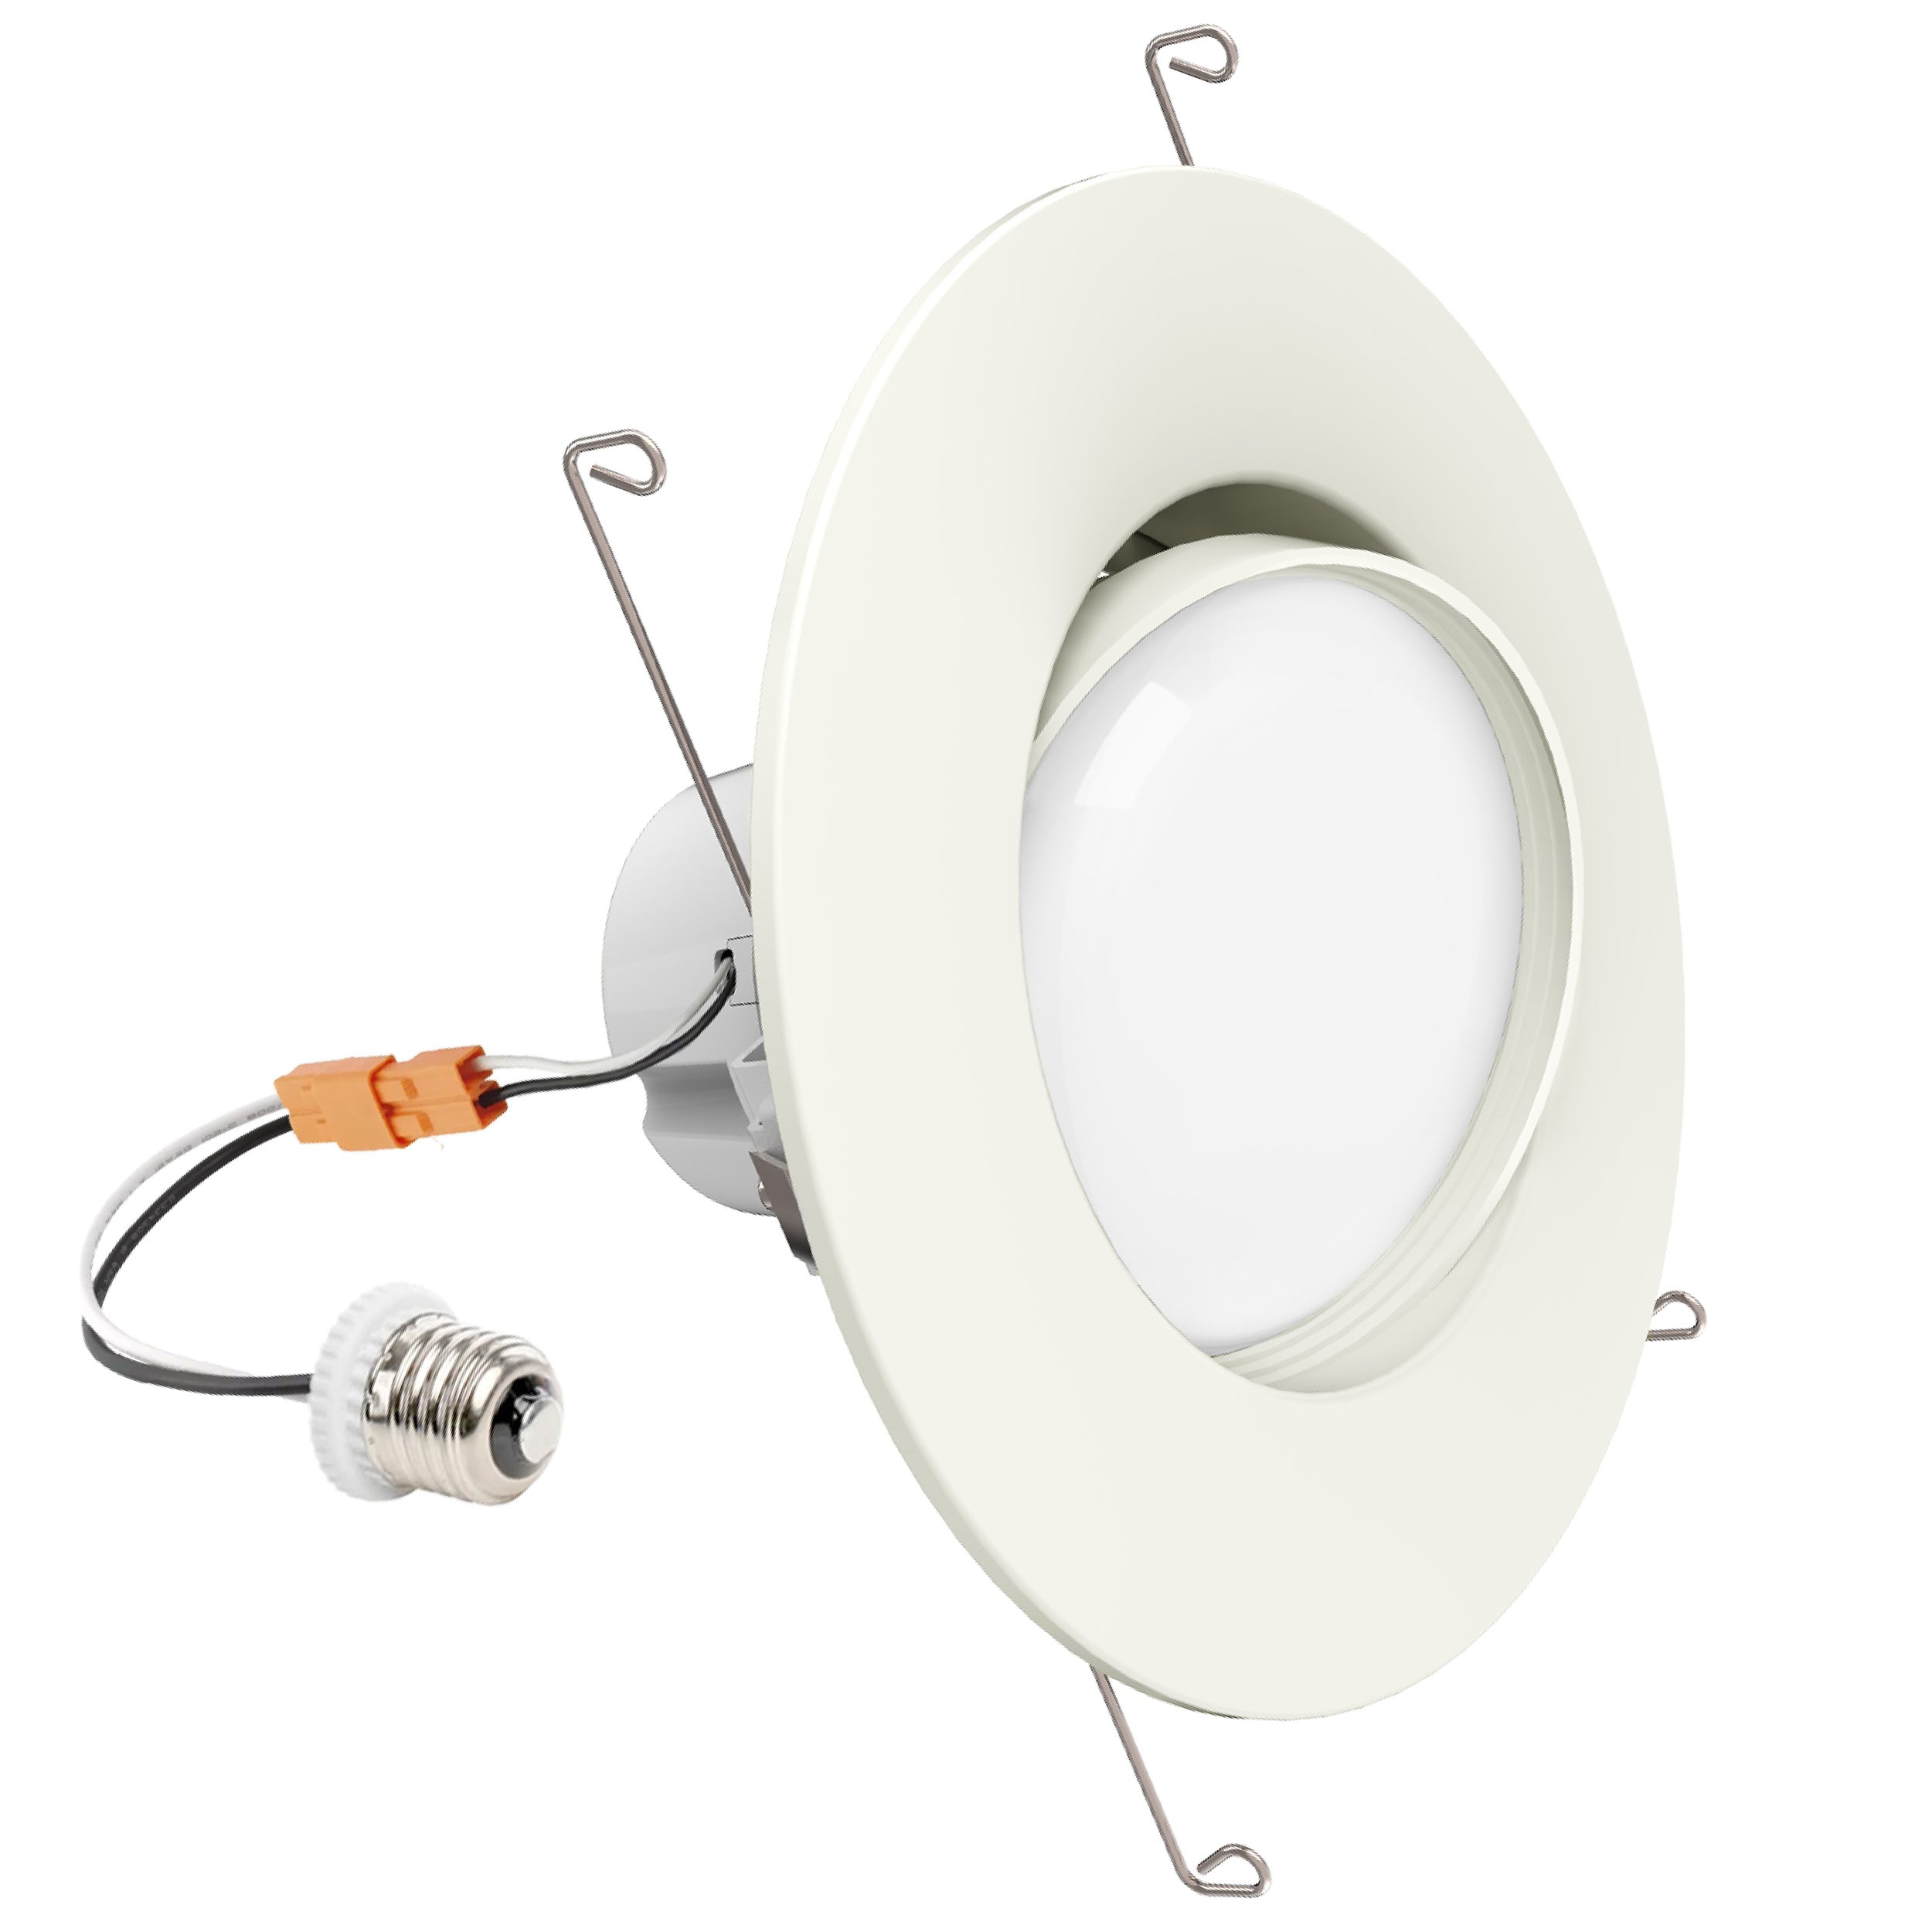 Swivel your LED downlight to spotlight artwork or for angled ceilings to fill a room with bright light. The Sunco Gimbal Retrofit Downlight fits in 5-inch and 6-inch cans by adjusting a screw. Easy to install to upgrade power-hungry traditional lights. This is a 12W LED fixture that is a 60W equivalent with its 800 lumens. Note the lens and LED swivel a full 360-degrees around or rotate up to 45-degrees to fill a nearby wall with light. Adjustable downlight is dimmable with compatible dimmers.